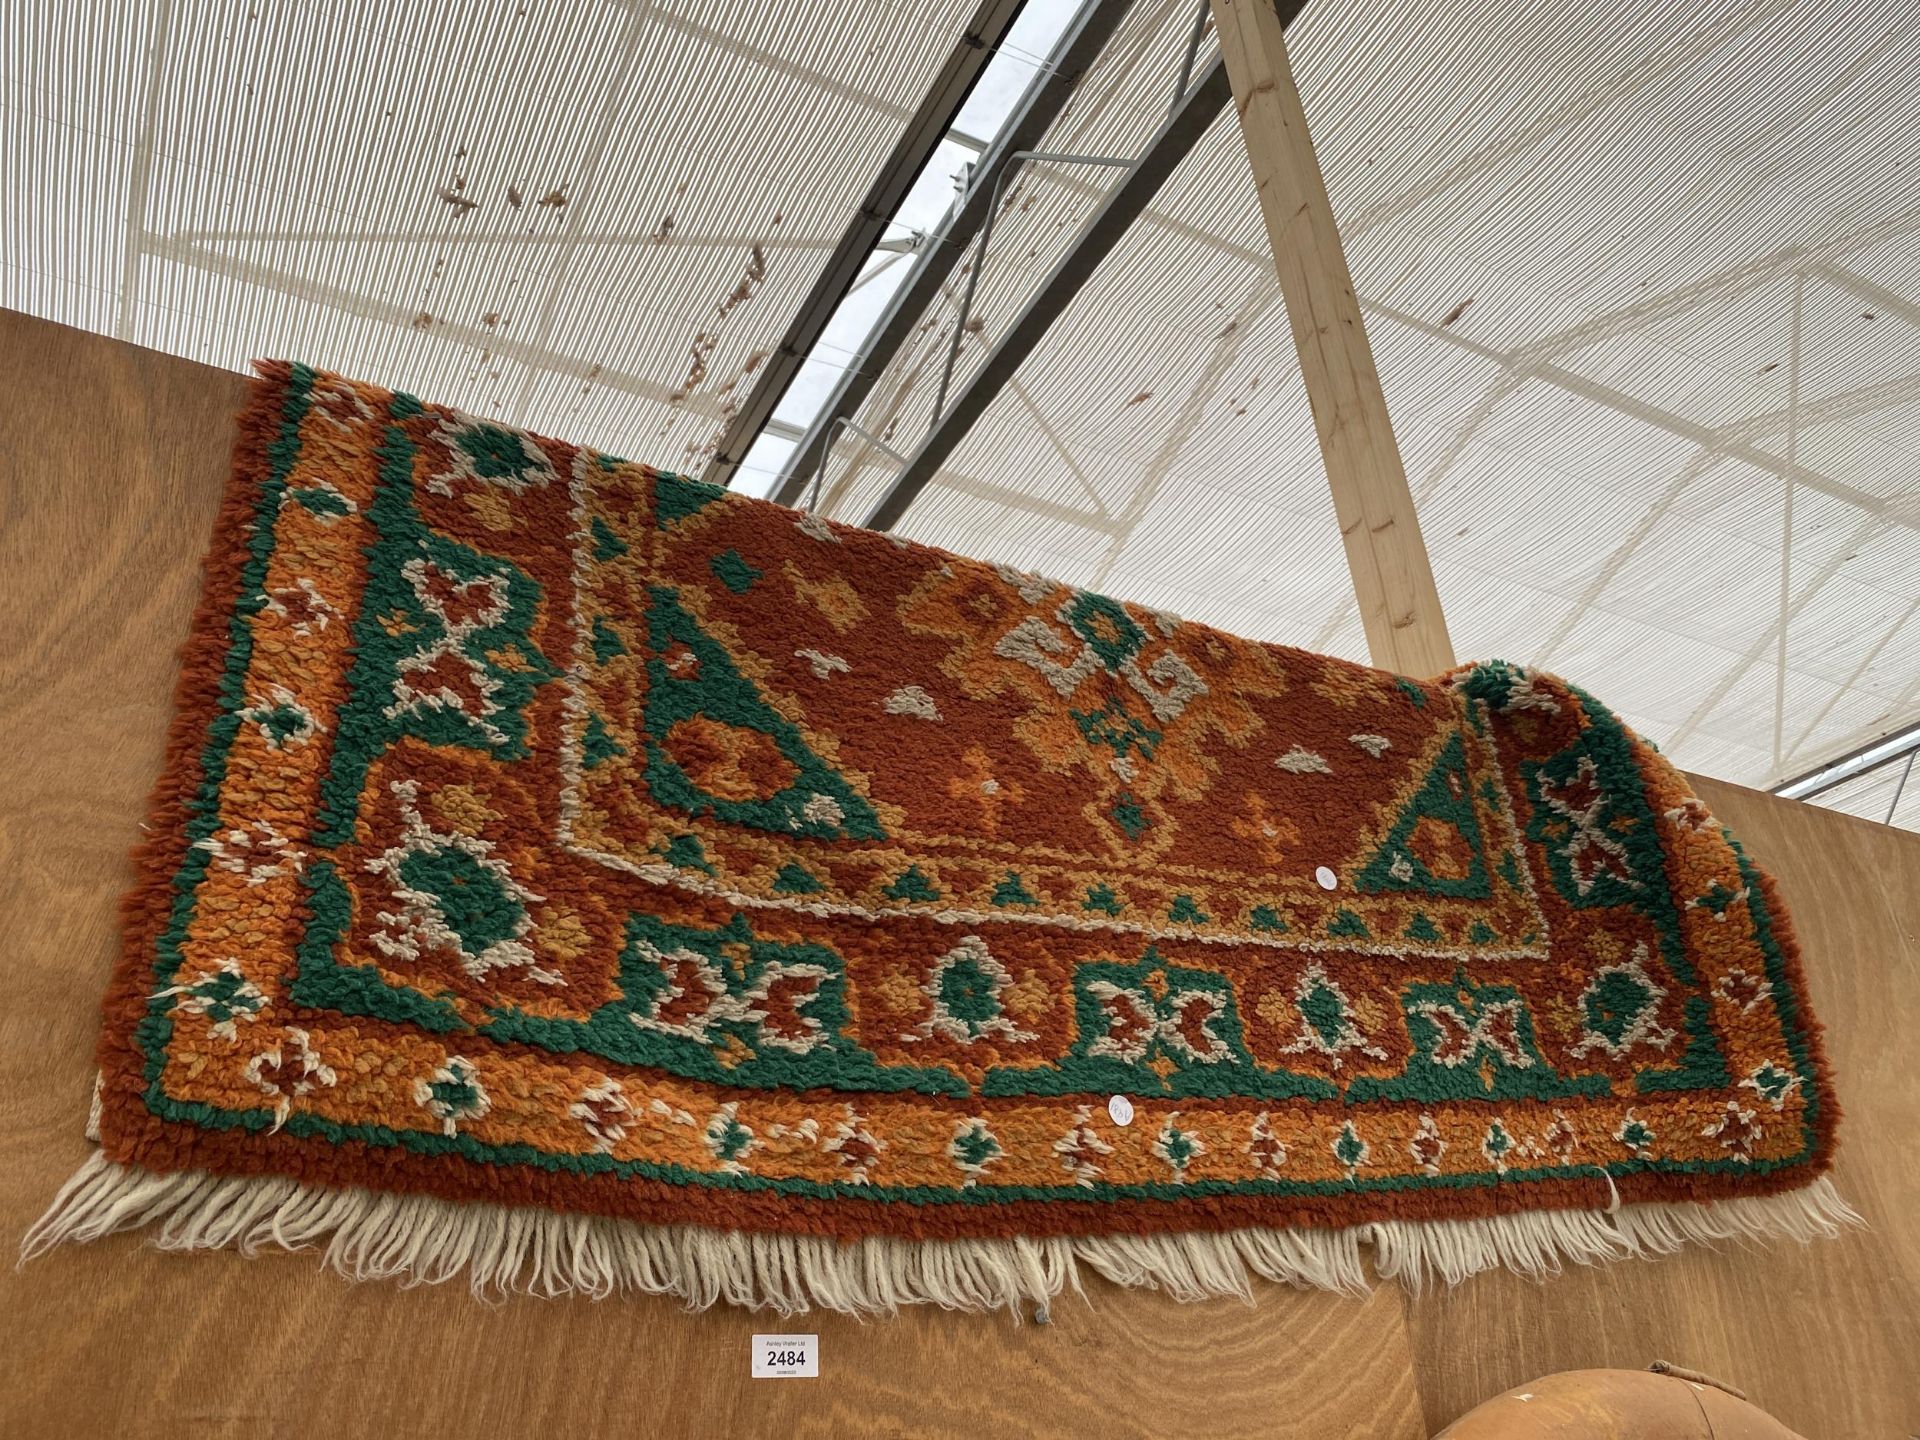 AN ORANGE AND GREEN PATTERNED FRINGED RUG